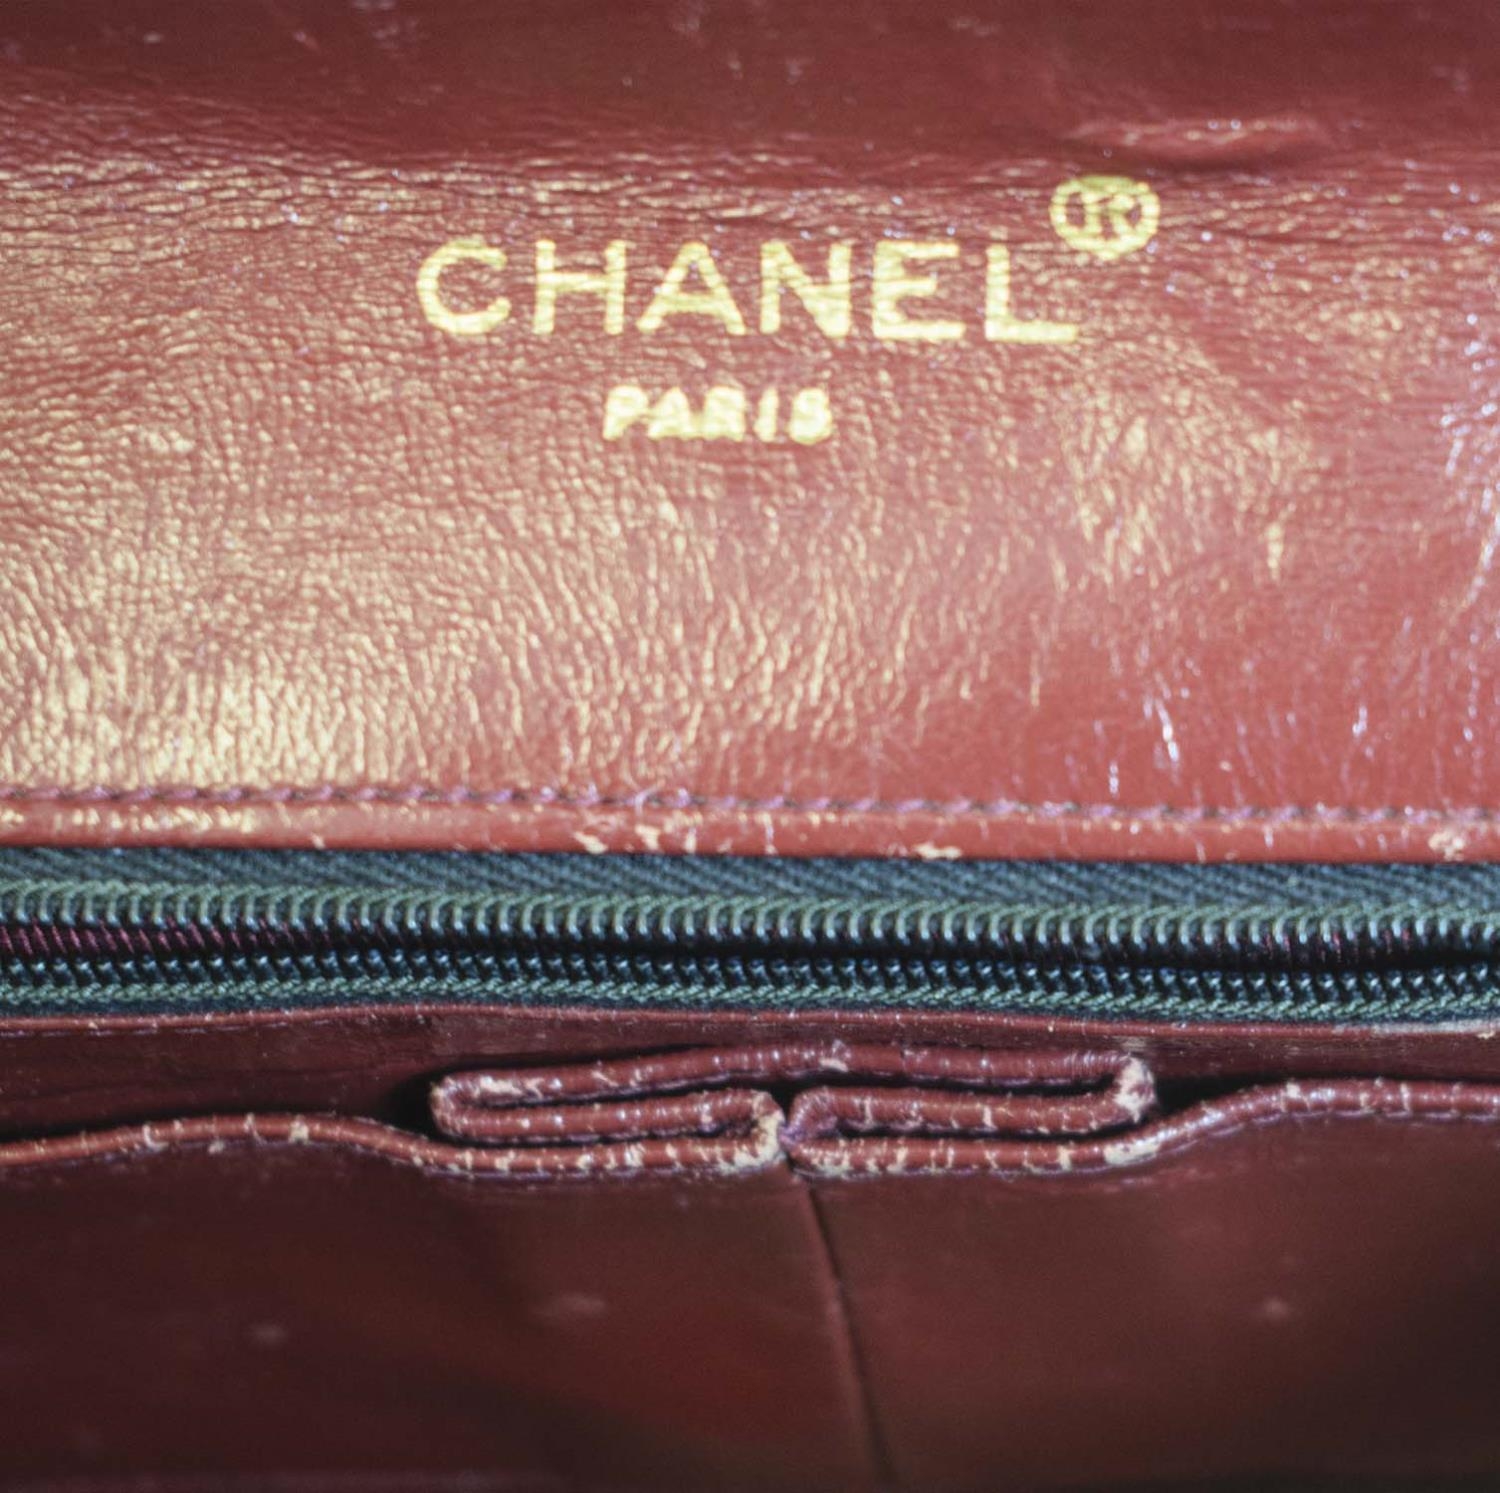 VINTAGE CHANEL FLAP BAG, round turn-lock, iconic burgundy leather lining, quilted front and back - Image 10 of 13